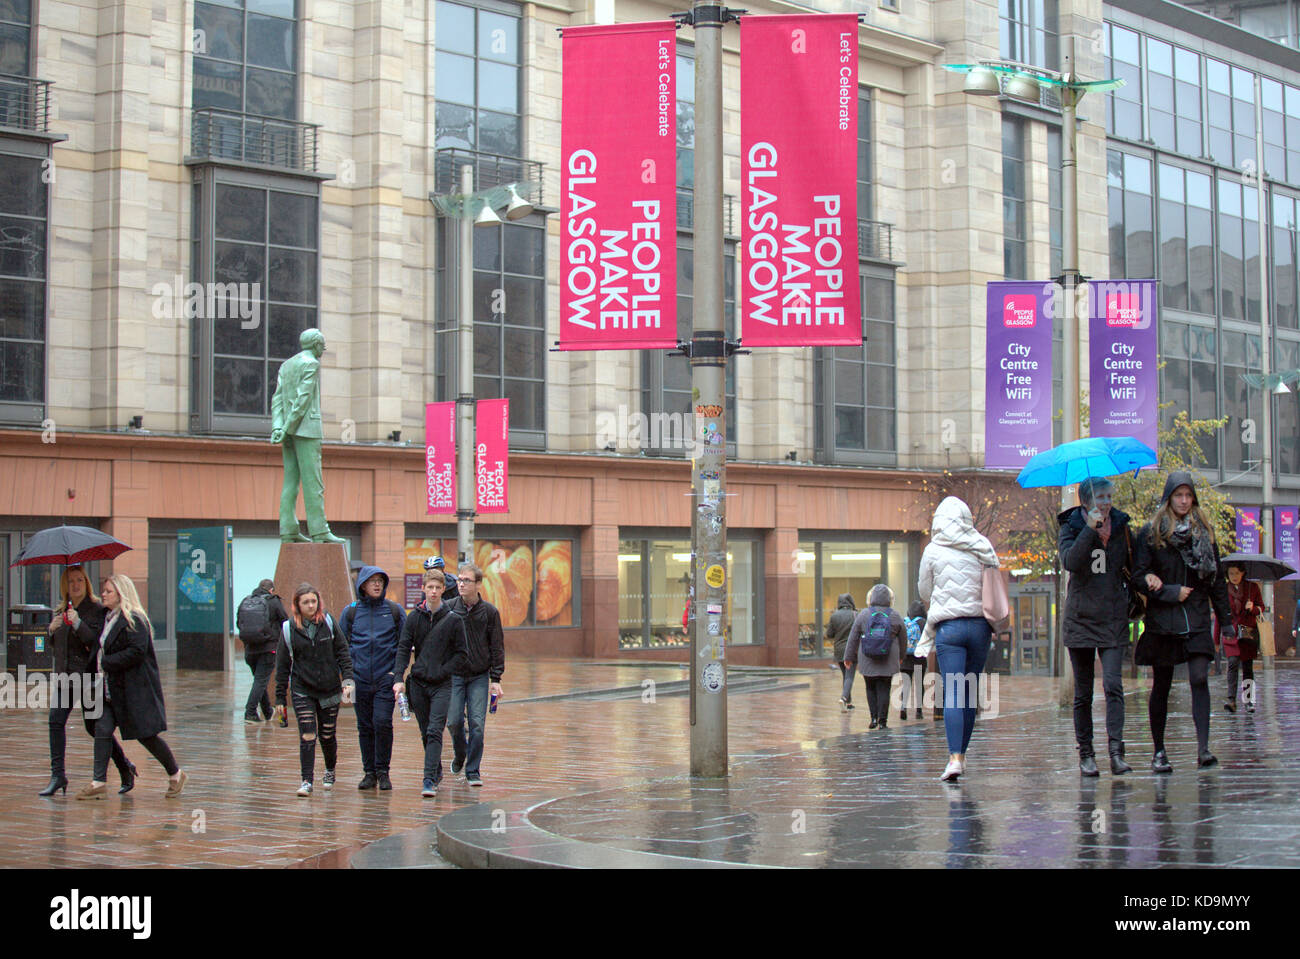 UK Weather The awful summer weather continues into autumn as Heavy showers and strong winds batter the city near the Donald Dewar statue on Buchanan Stock Photo